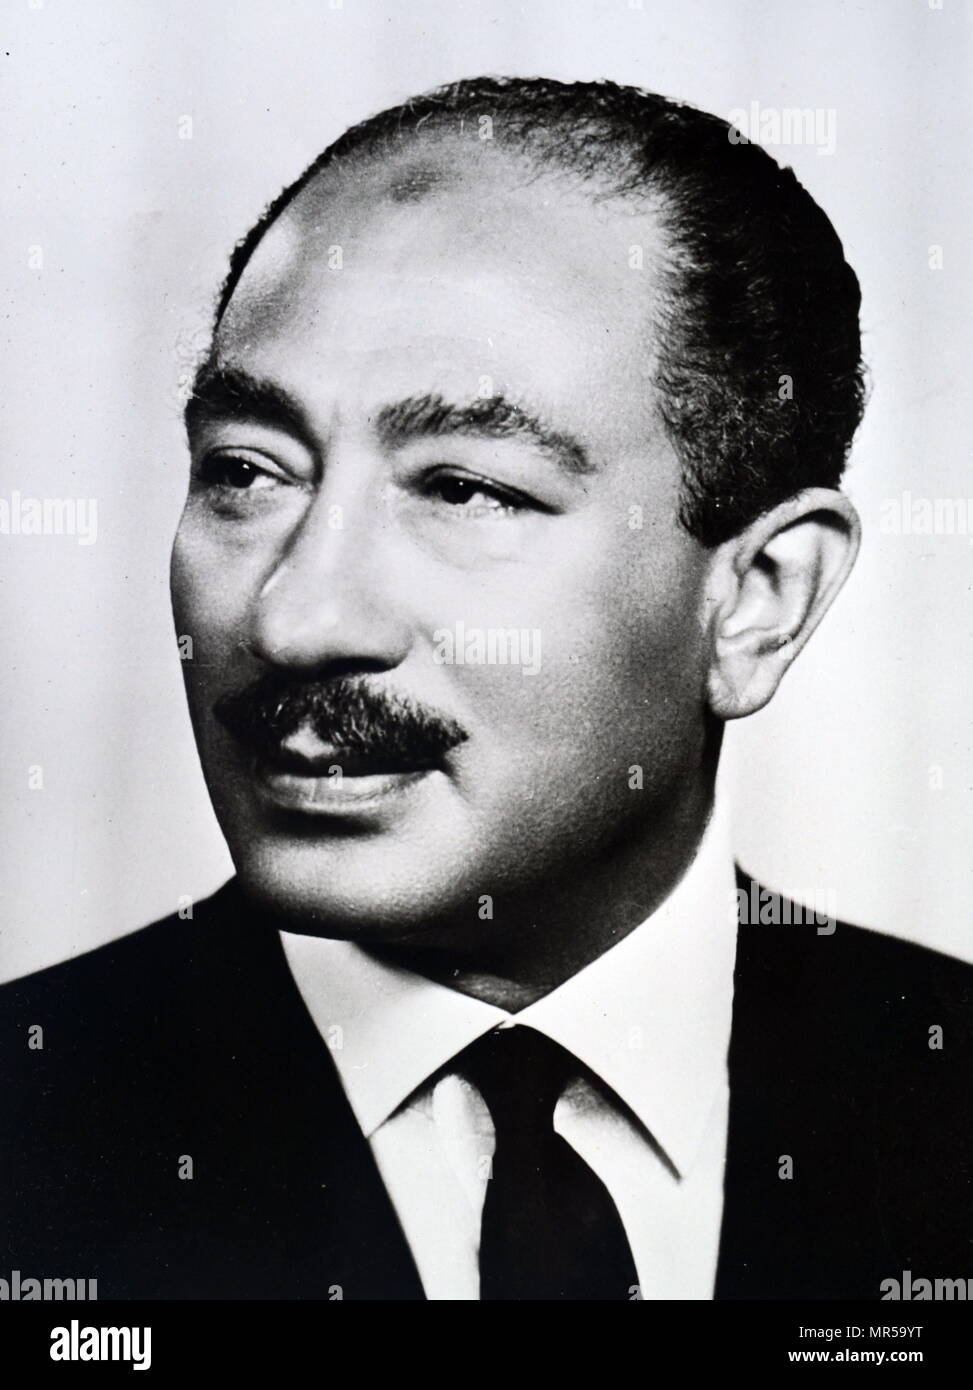 Photograph of Anwar Sadat (1918-1981) third President of Egypt until his assassination by fundamentalist army officers. Sadat sought diplomatic settlement of Arab-Israeli conflict. He was awarded Nobel Peace Prize in 1978.  Dated 20th century Stock Photo